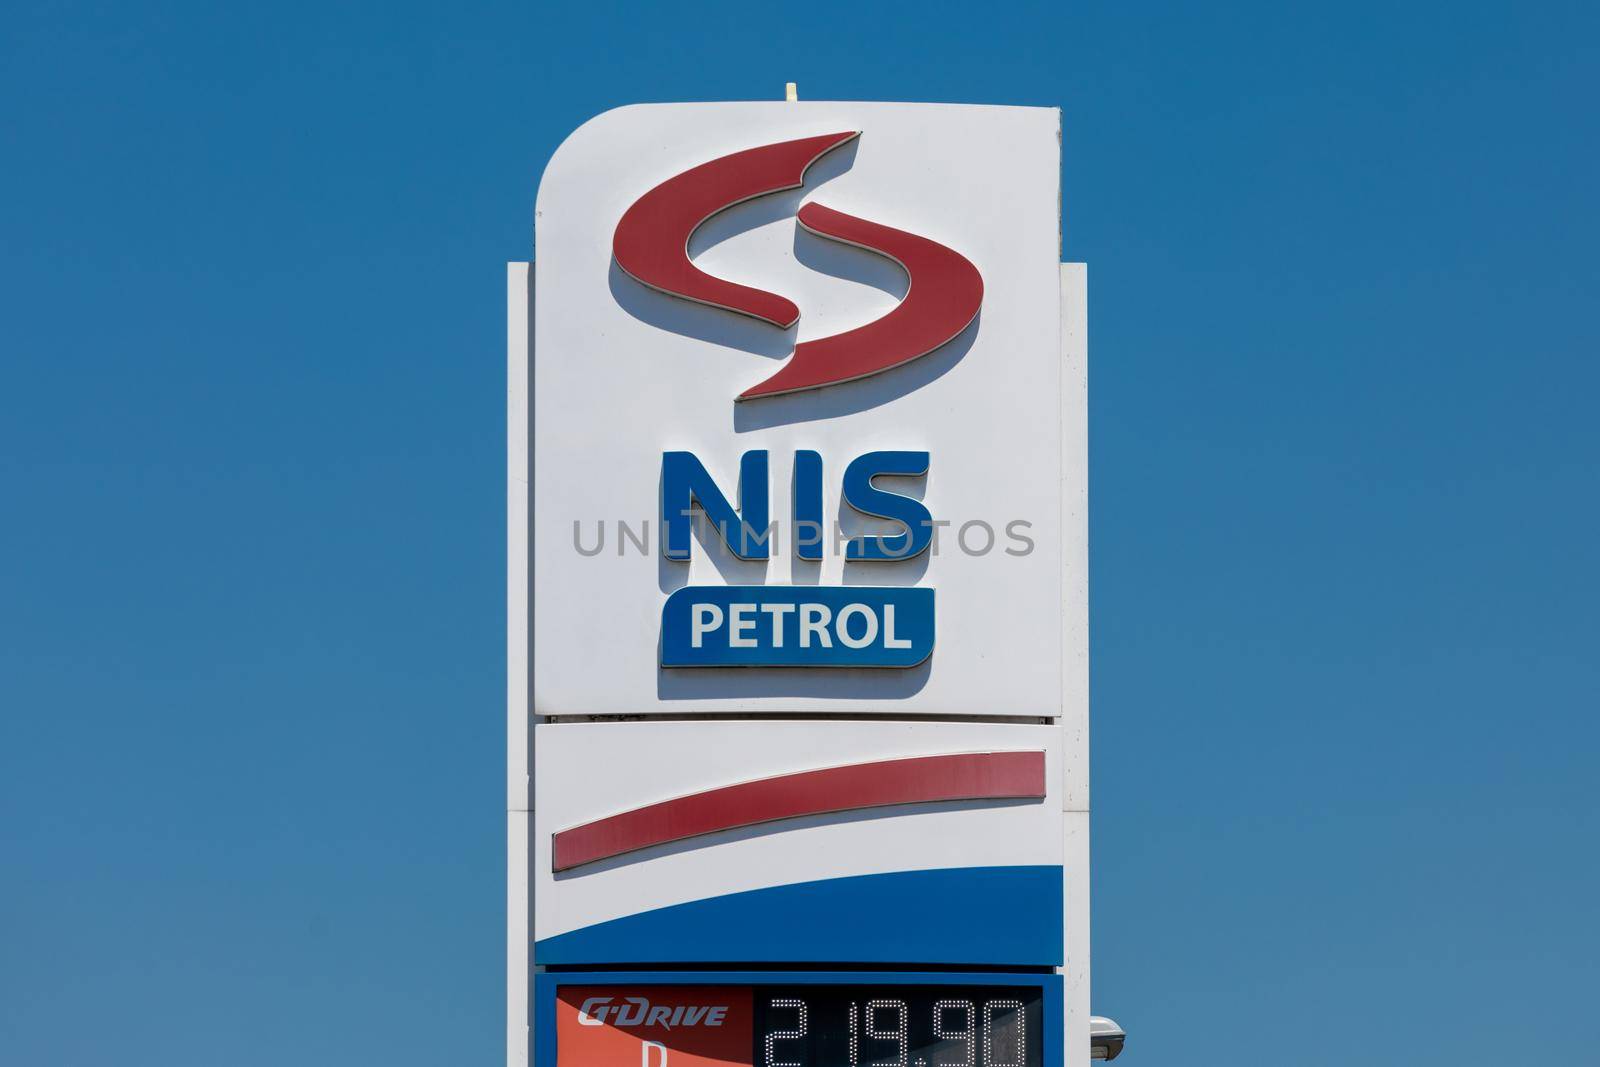 Valjevo, Serbia - June 20, 2022: Logo and sign of NIS Petrol on gas station. NIS Petrol (Oil Industry of Serbia) is an largest oil refining company in Serbia